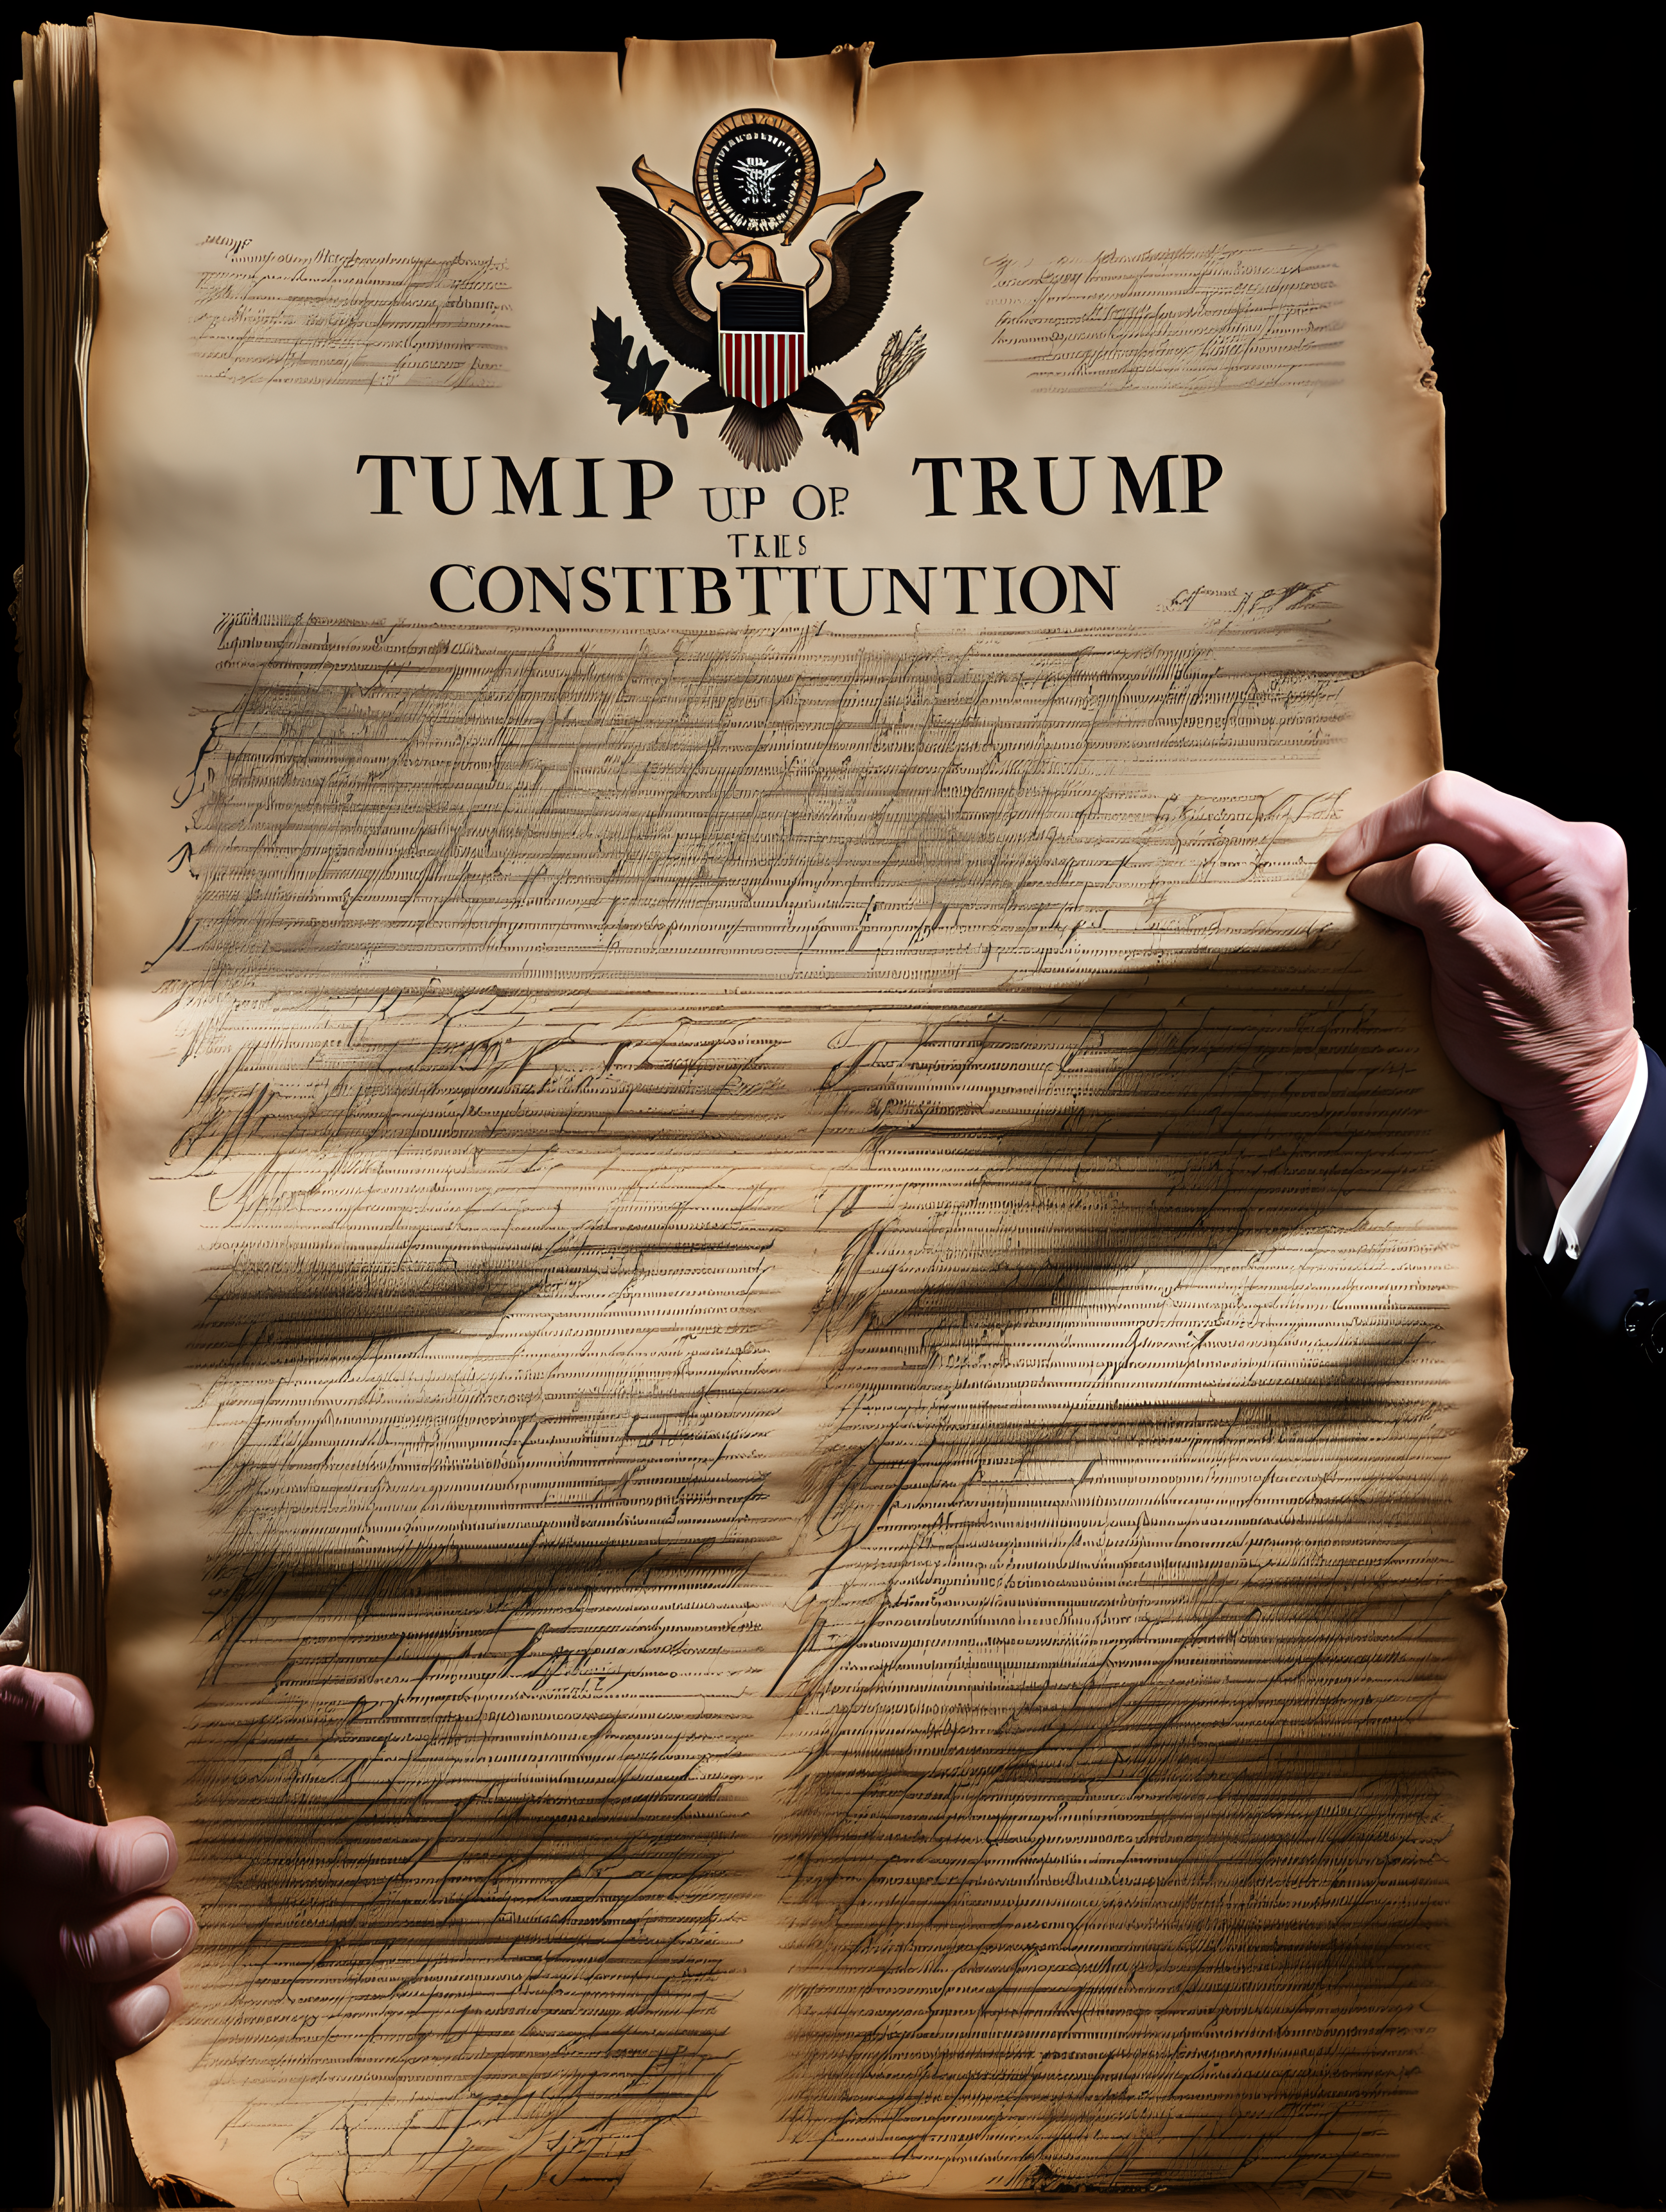 Donald Trump rips up the constitution